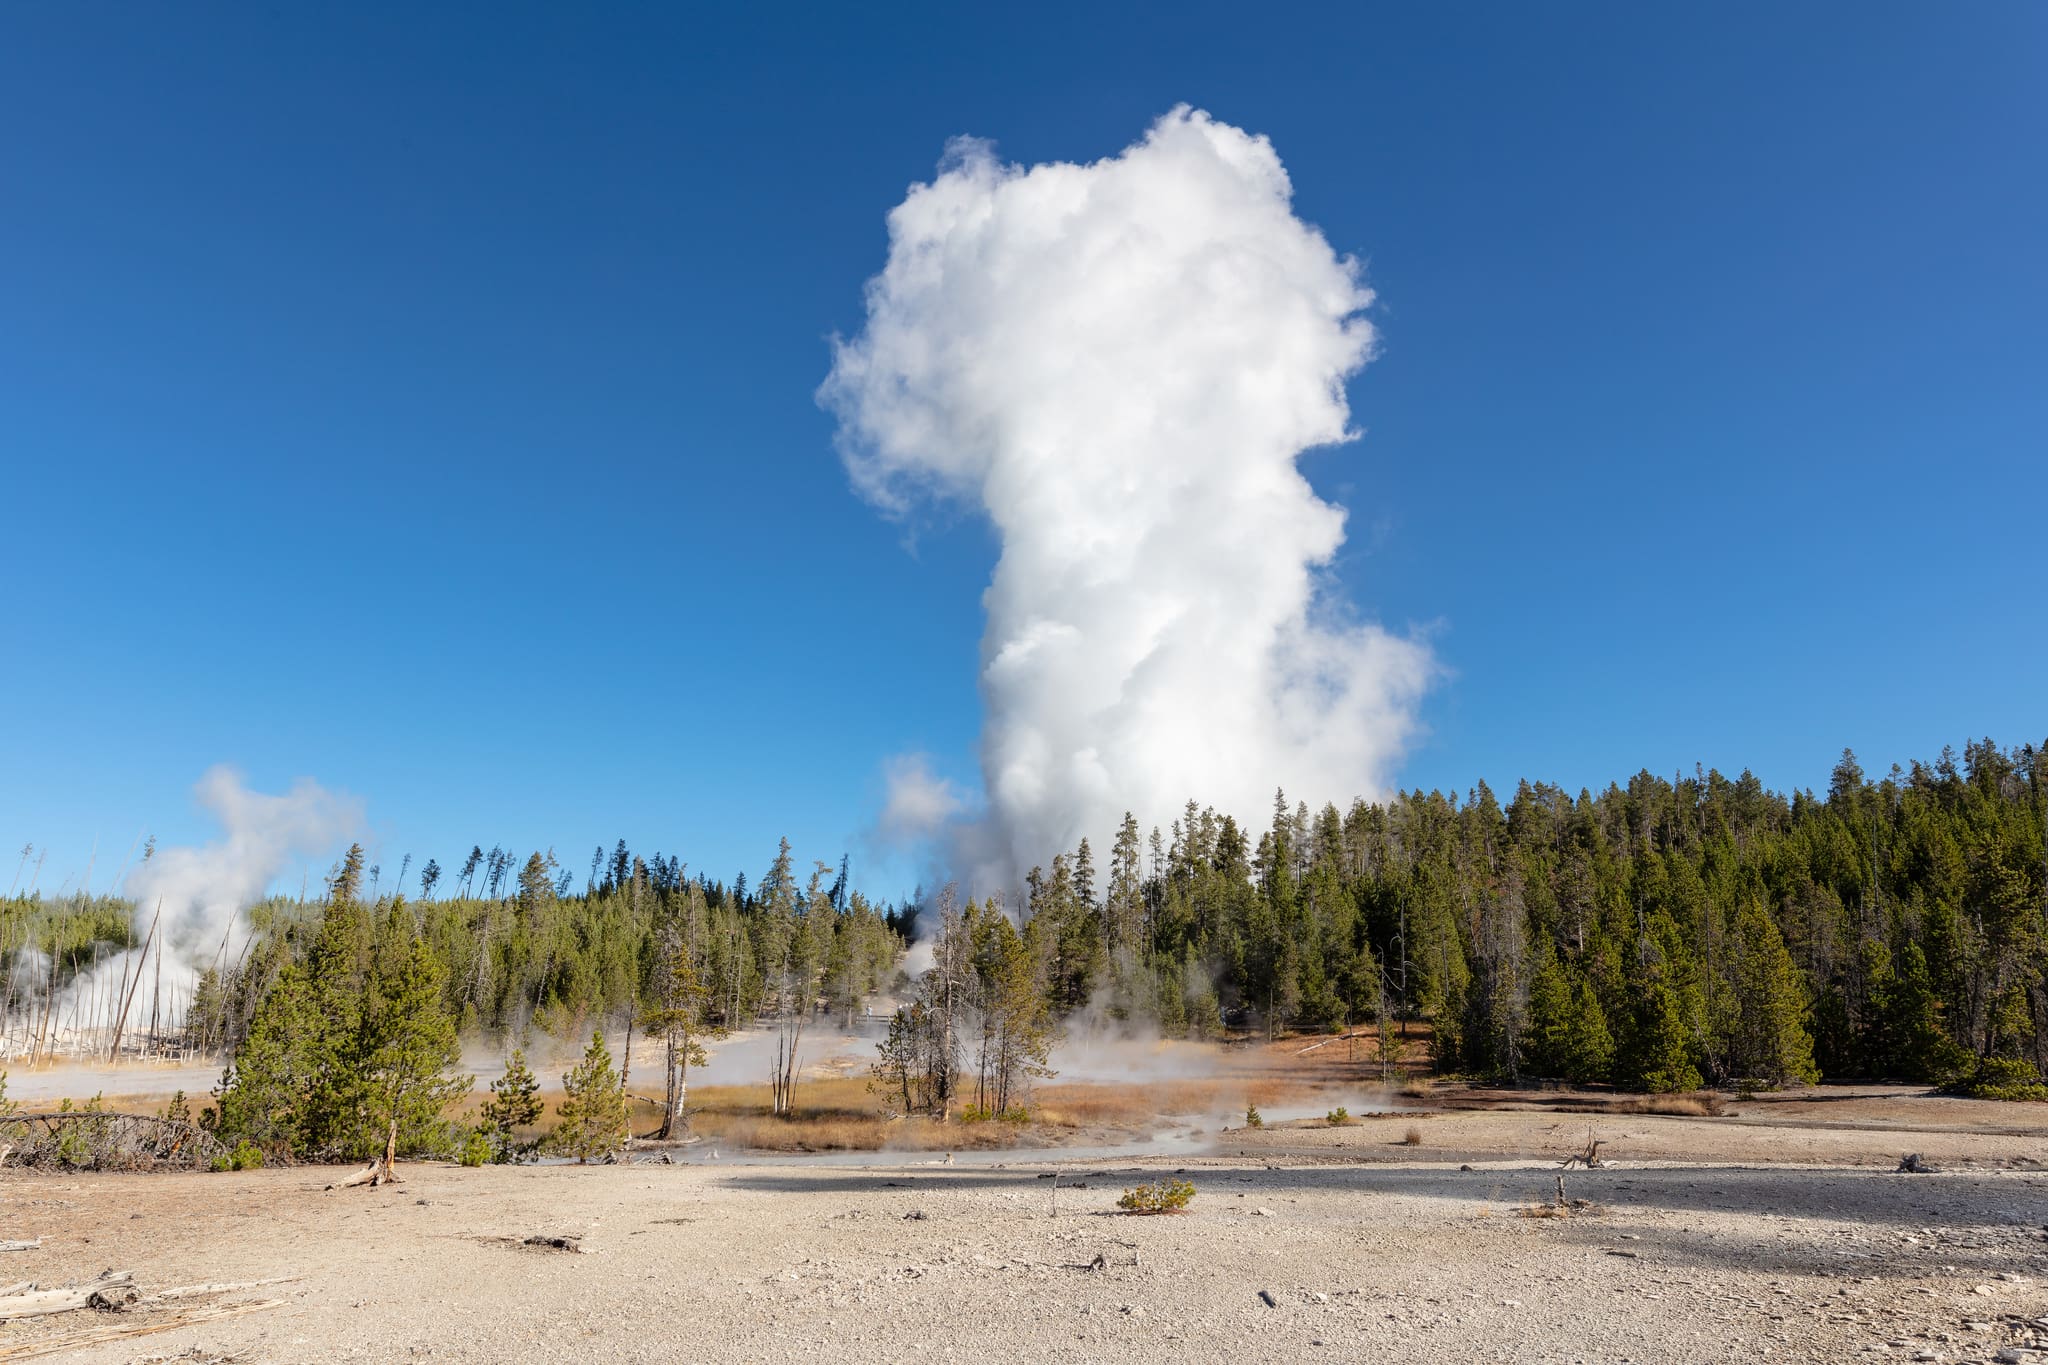 a geyser erupts over a bare forest near hot springs